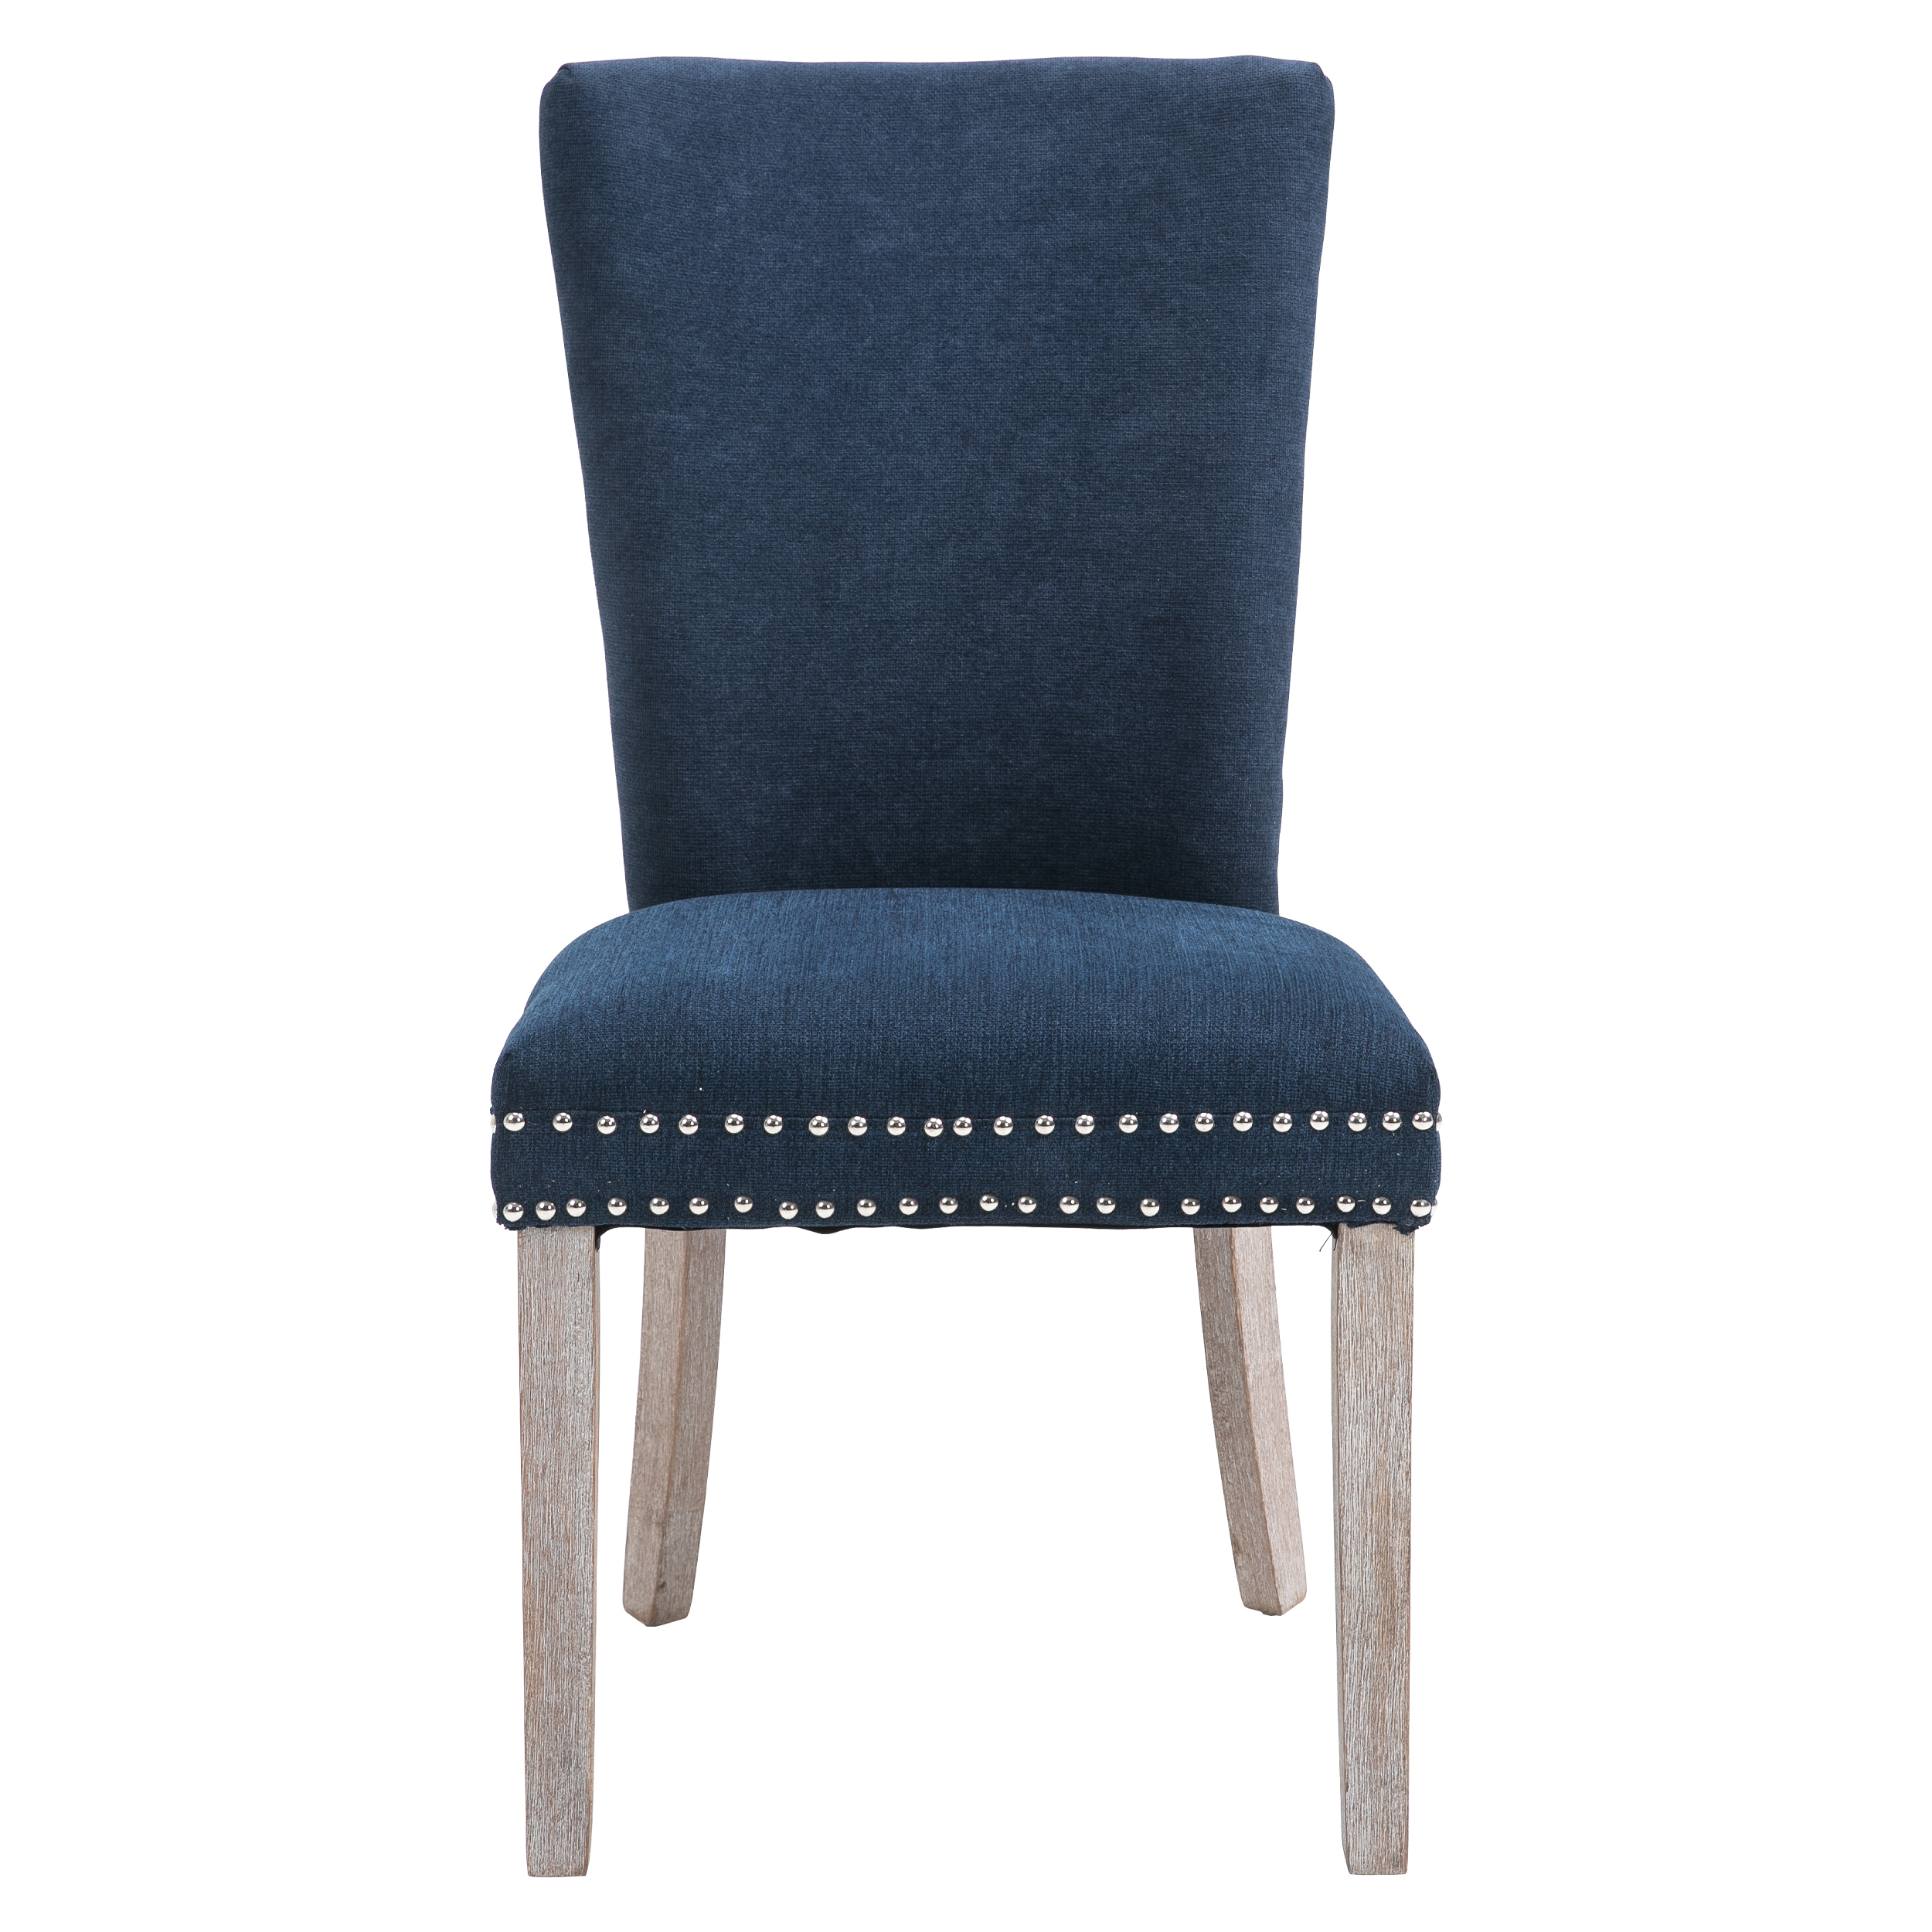 40 in. Classic Navy Blue Terry Fabric Nail-head Tufted Parsons Chairs, Dining Chair with 4 Solid Wood Legs, Set of 2-CASAINC